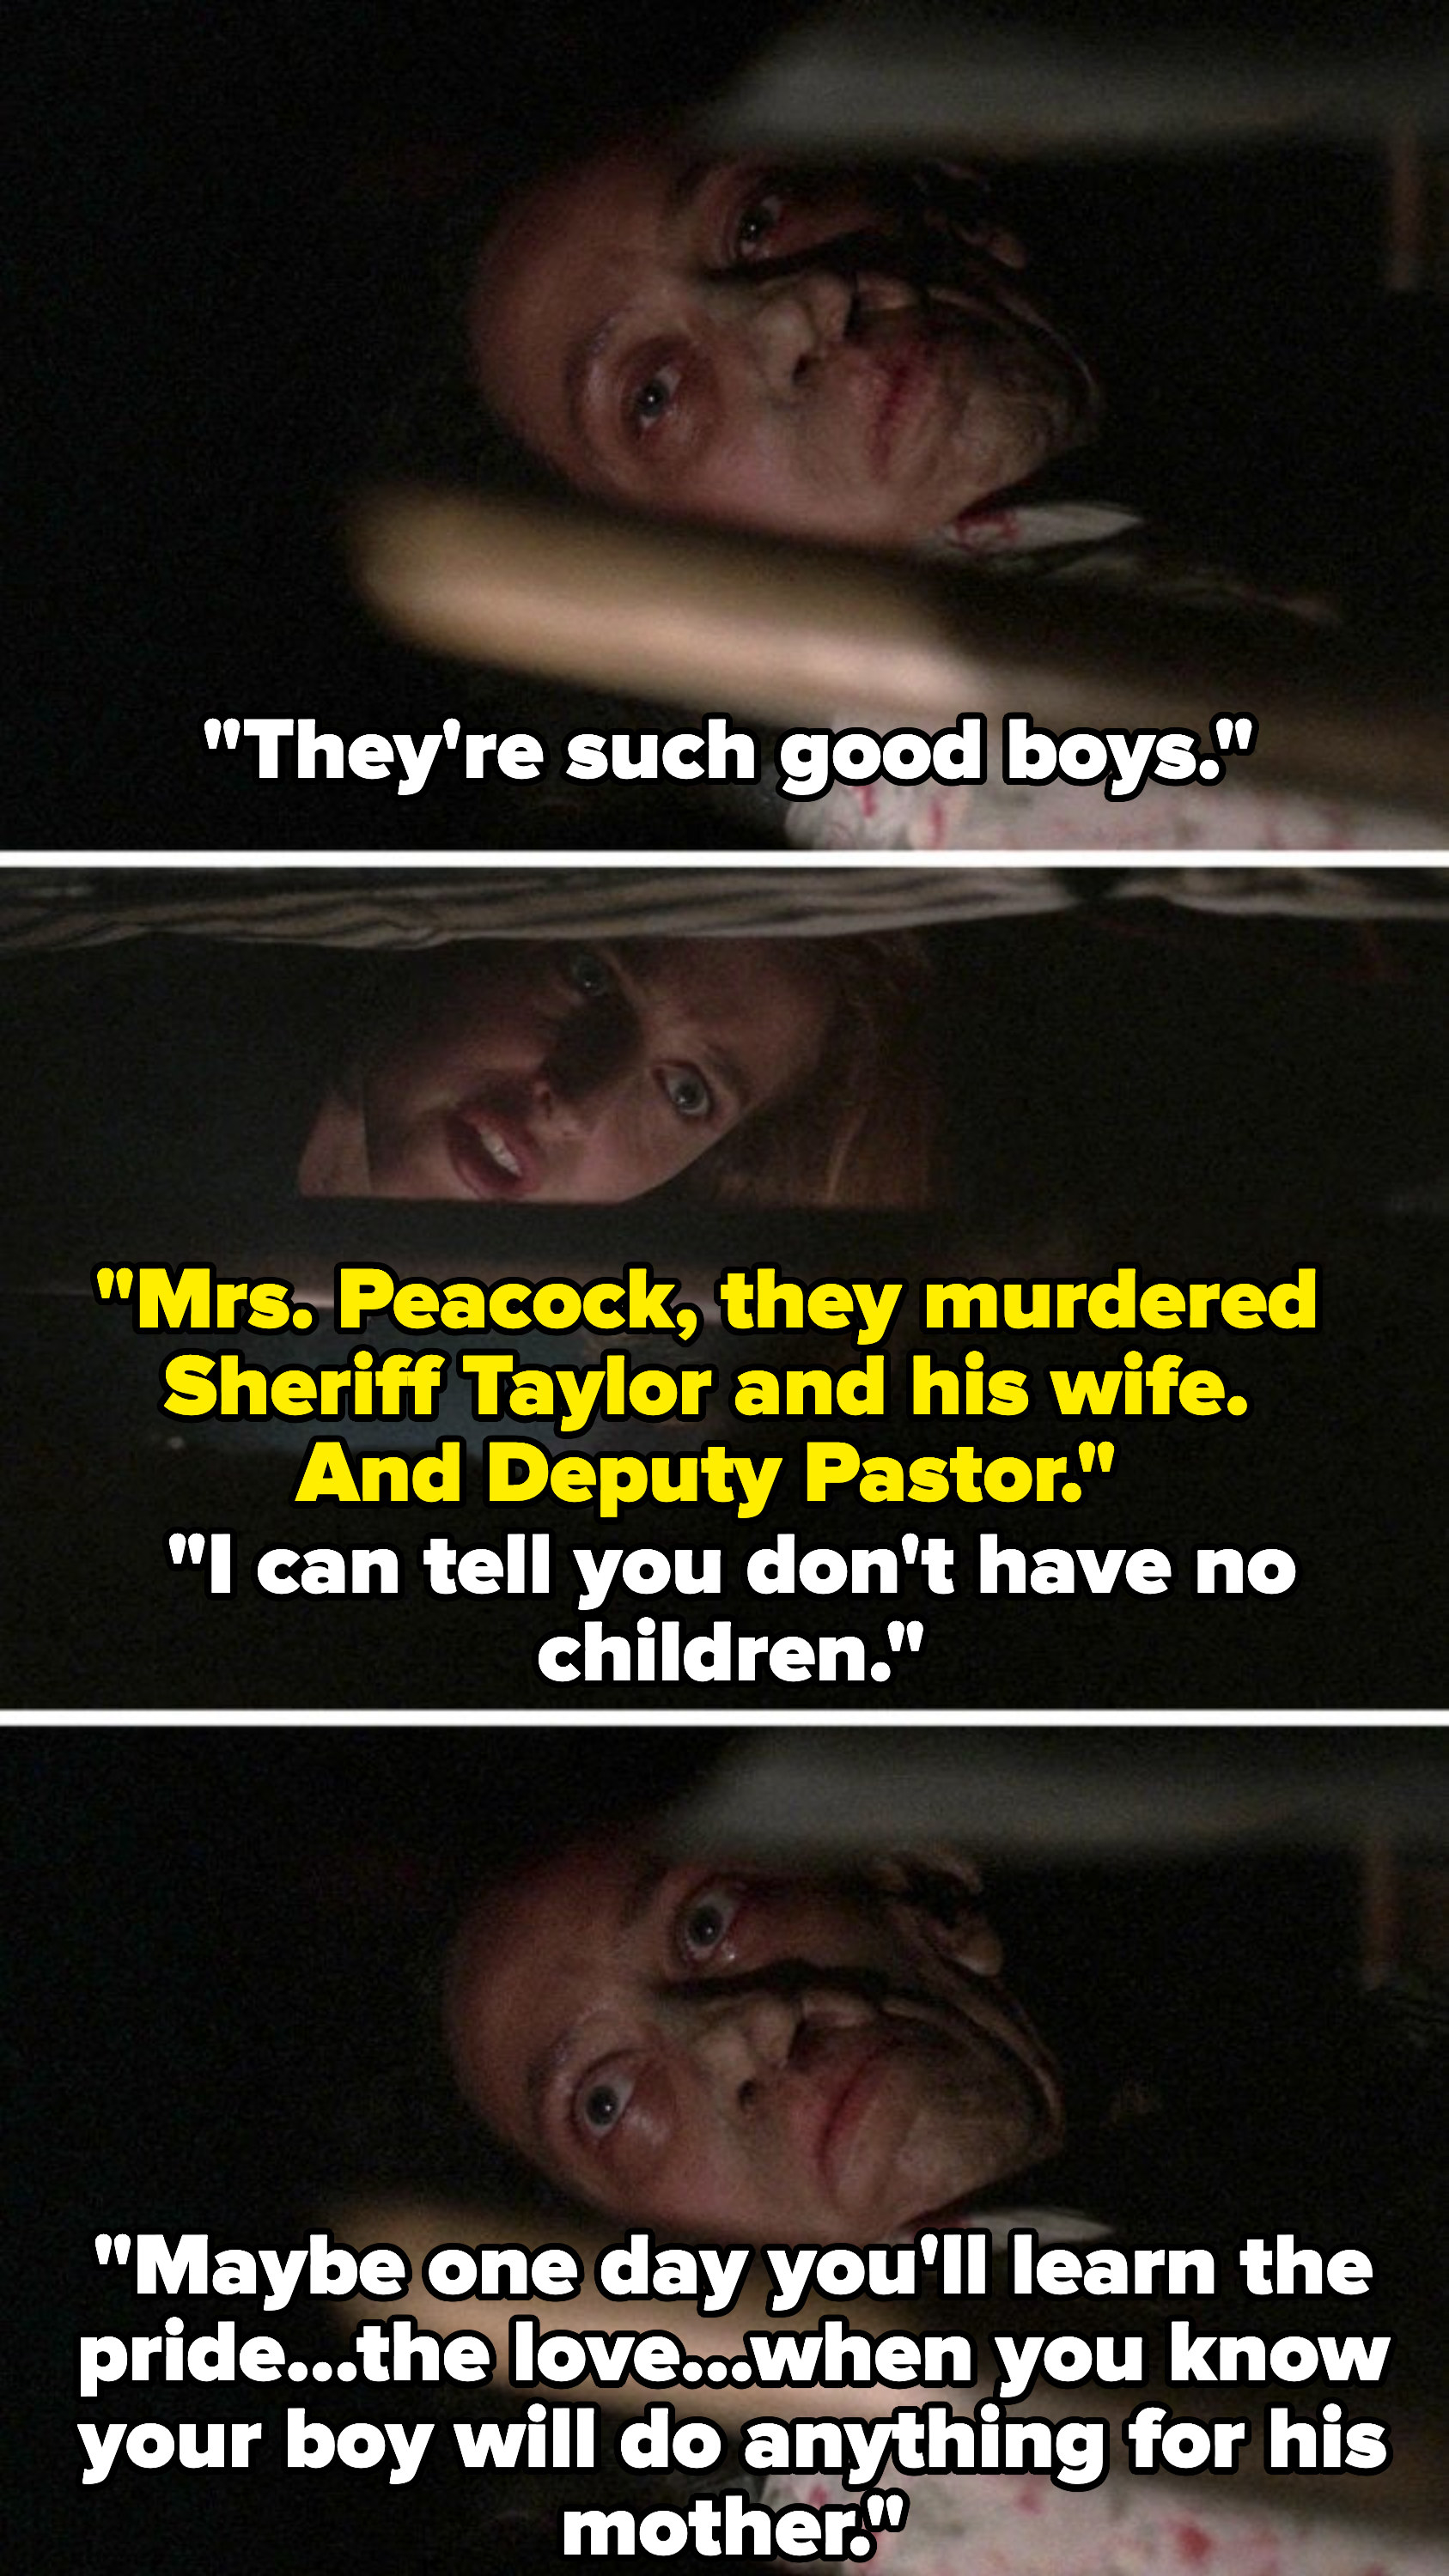 Peacock calls her sons good boys and Scully says they killed the sheriff, his wife, and a deputy. Peacock says &quot;I can tell you don&#x27;t have no children. Maybe one day you&#x27;ll learn the pride, the love, when you know your boy will do anything for his mother.&quot;